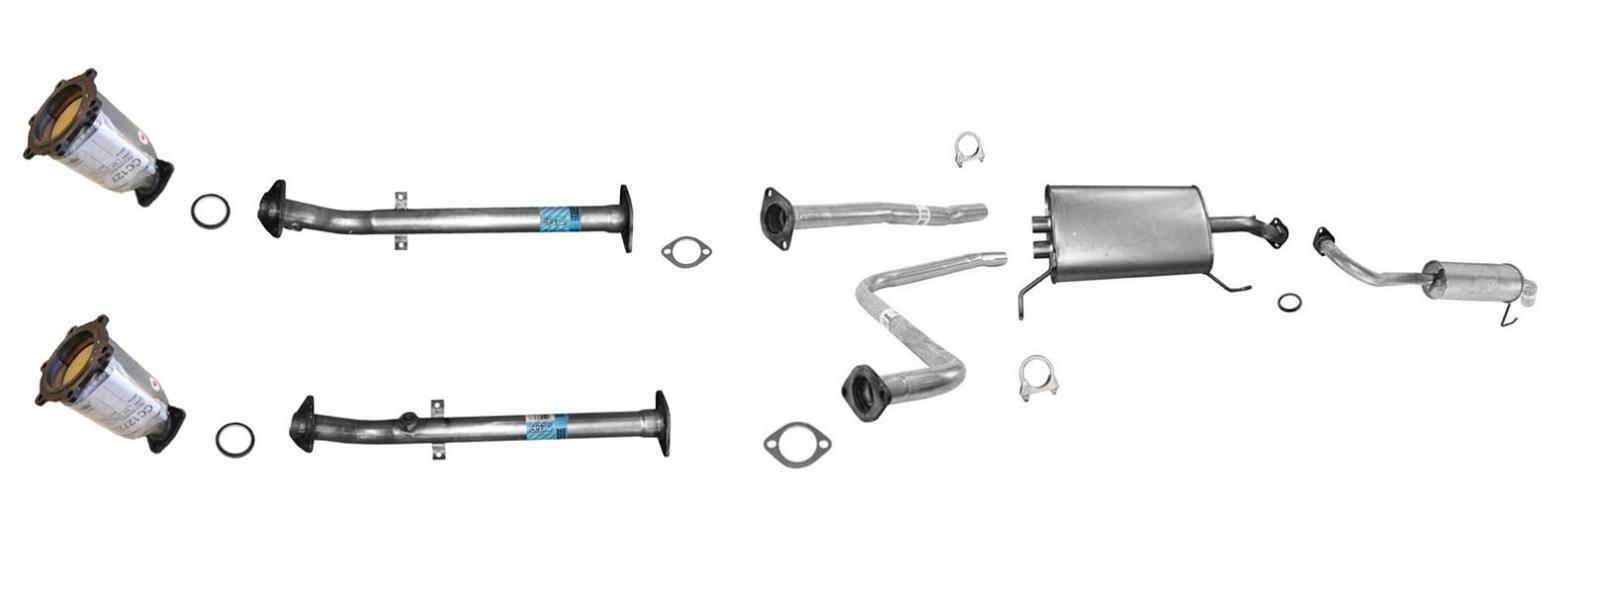 Exhaust System with Federal Emissions for Pathfinder 96-00 & QX4 97-00 3.3L